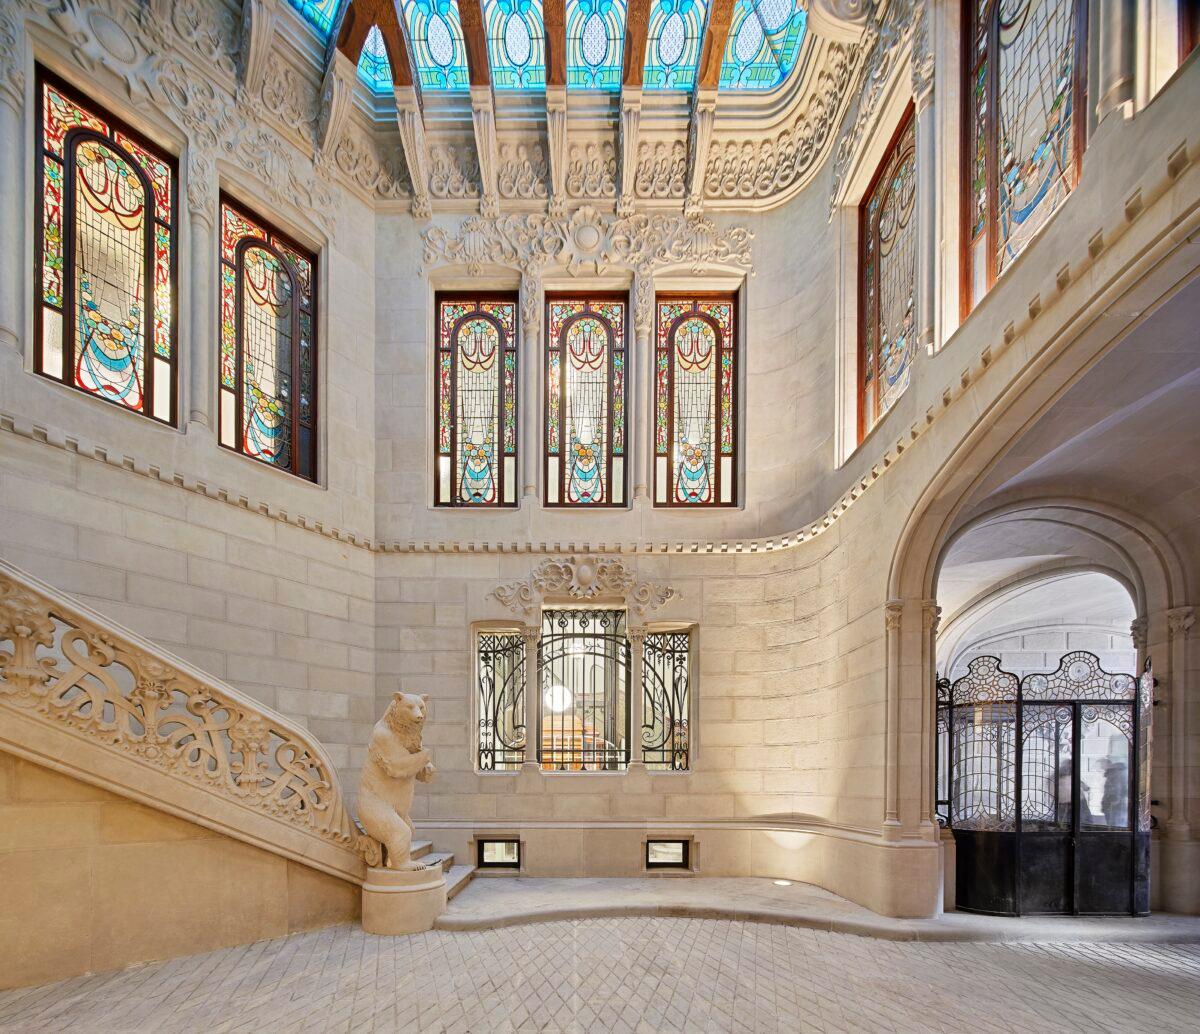 Surrounded by polychromed stained-glass windows, the lobby showcases Casa Burés’s prized art nouveau elements. In the center, an imposing life-size stone bear stands on its hind legs to protect the riches inside. (Jordi Folch and Jose Hevia)